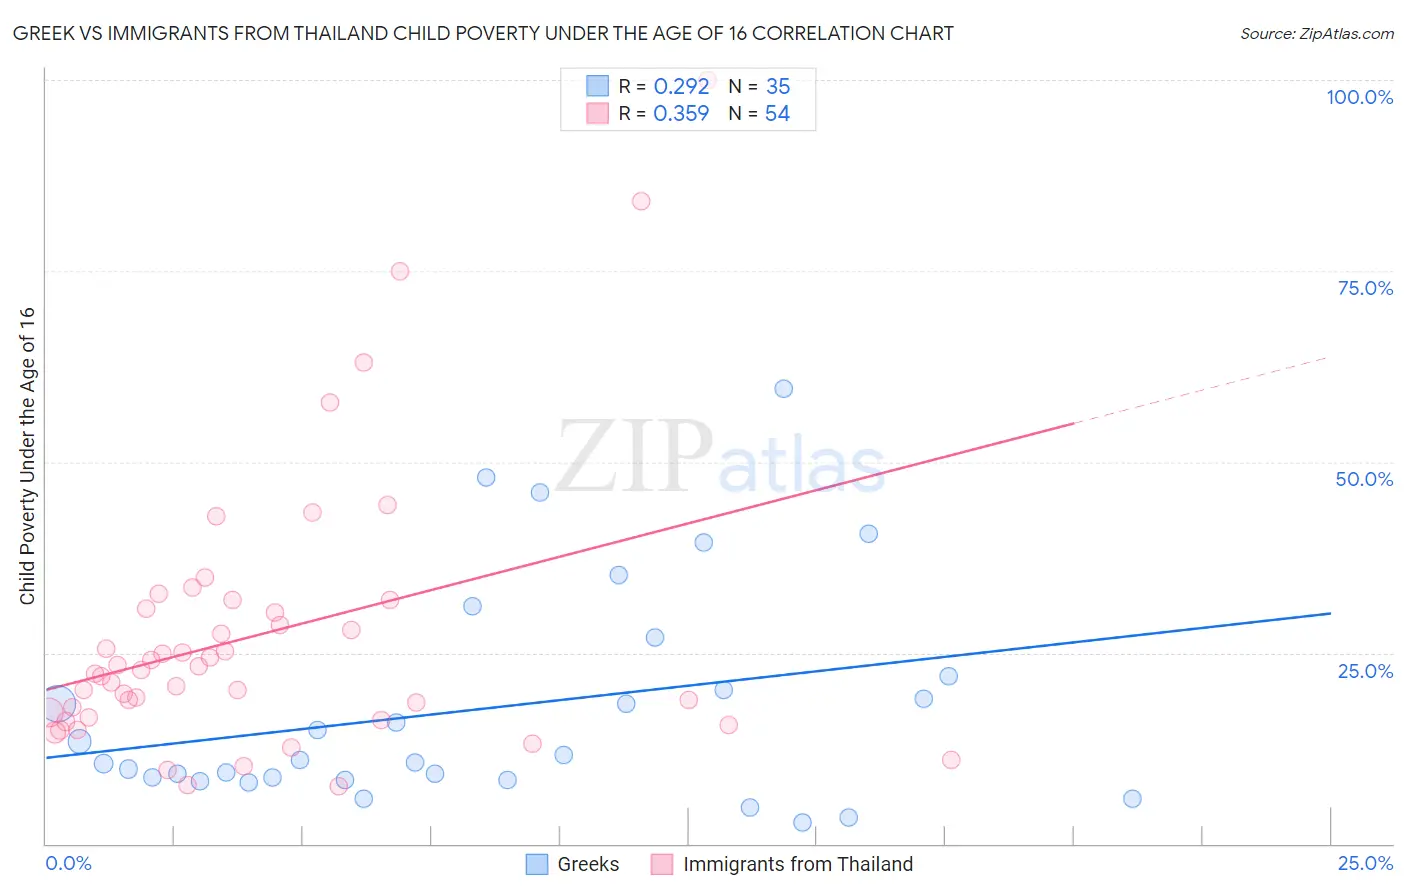 Greek vs Immigrants from Thailand Child Poverty Under the Age of 16